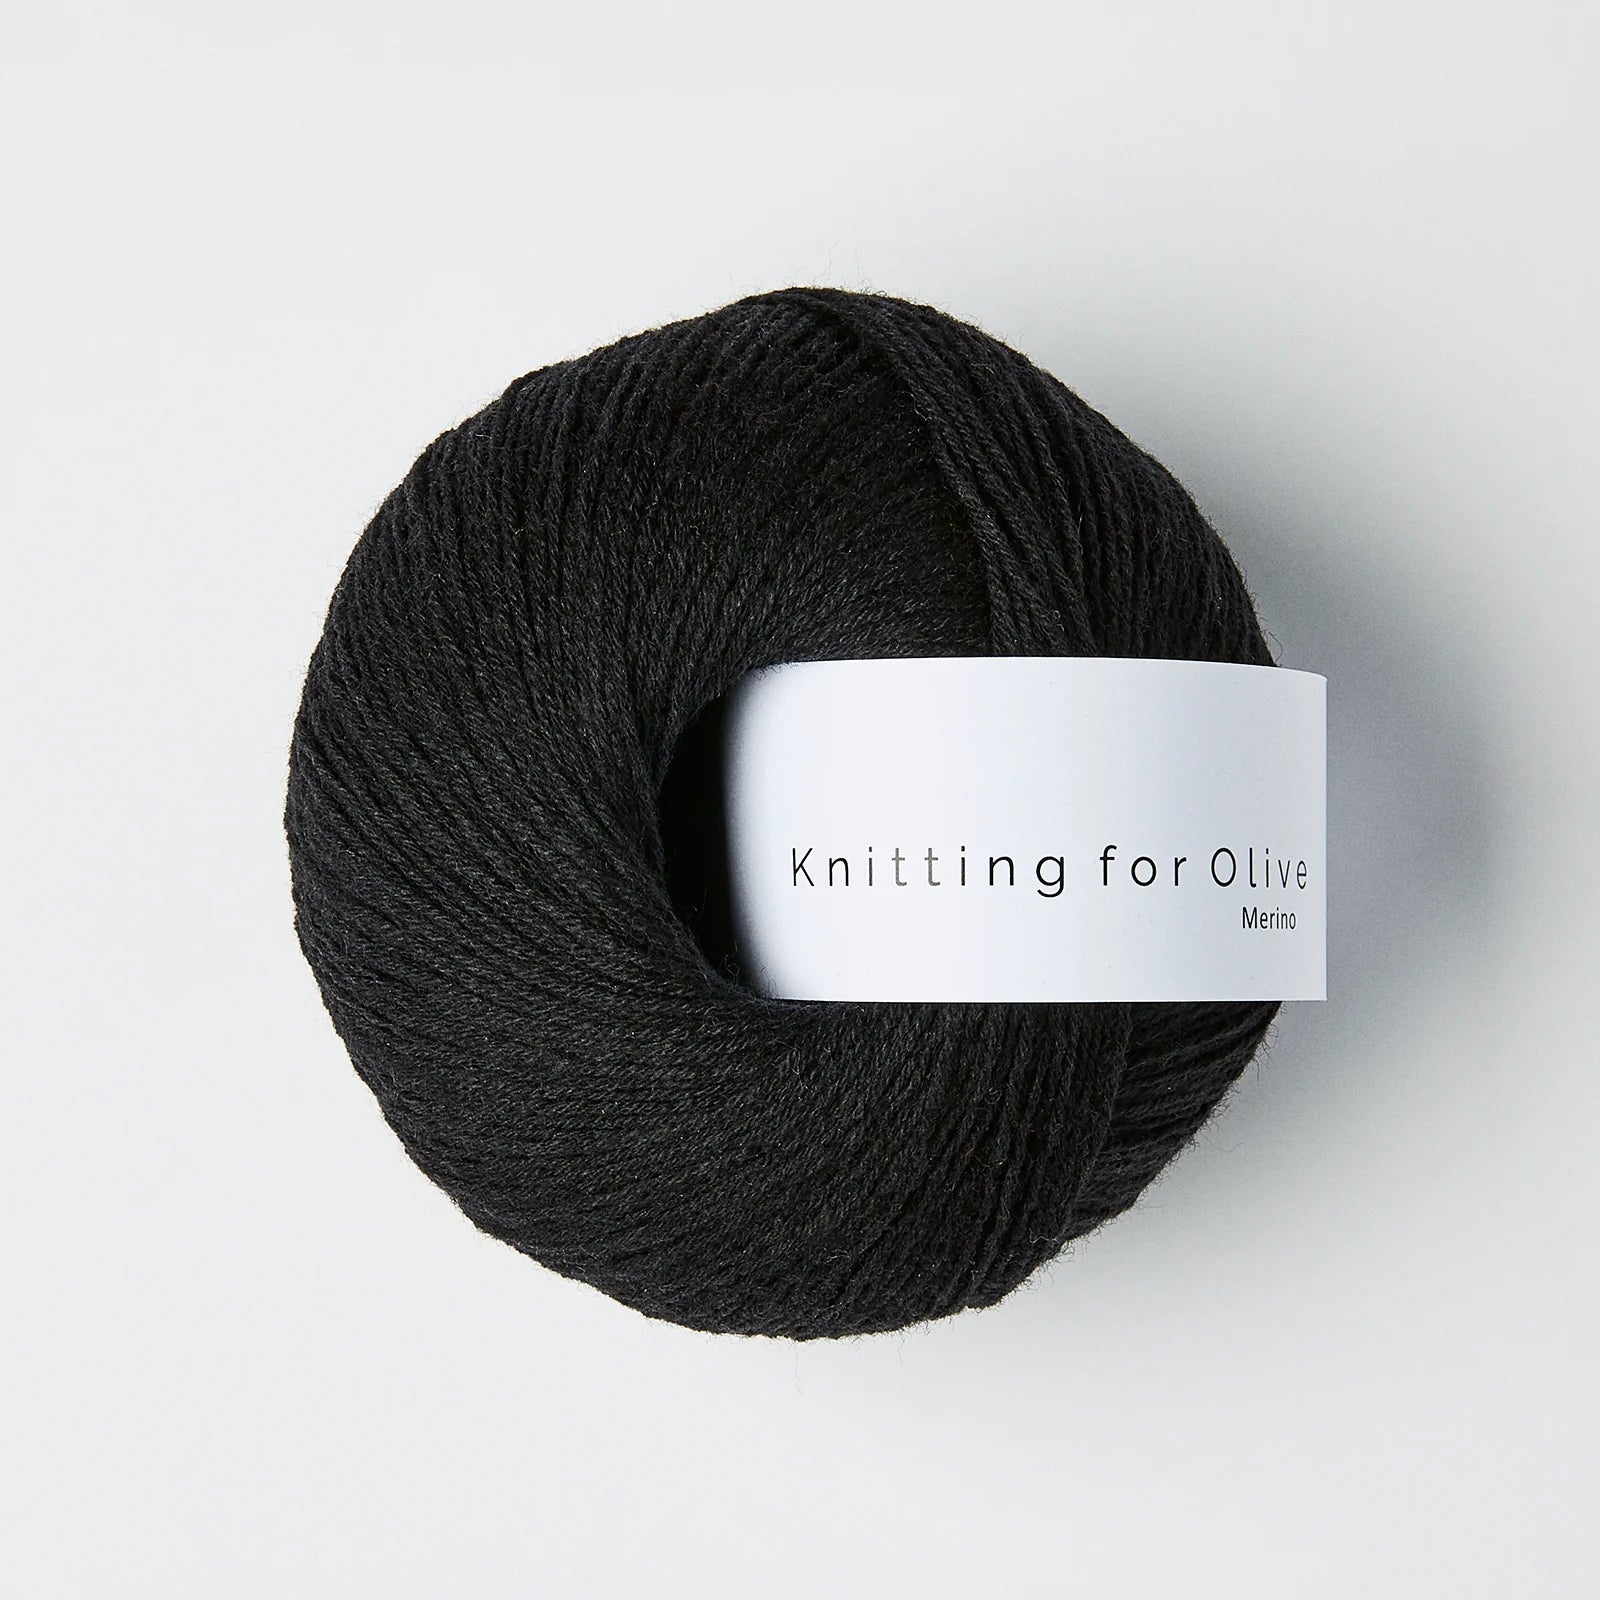 Knitting for Olive Merino - Knitting for Olive - Licorice - The Little Yarn Store